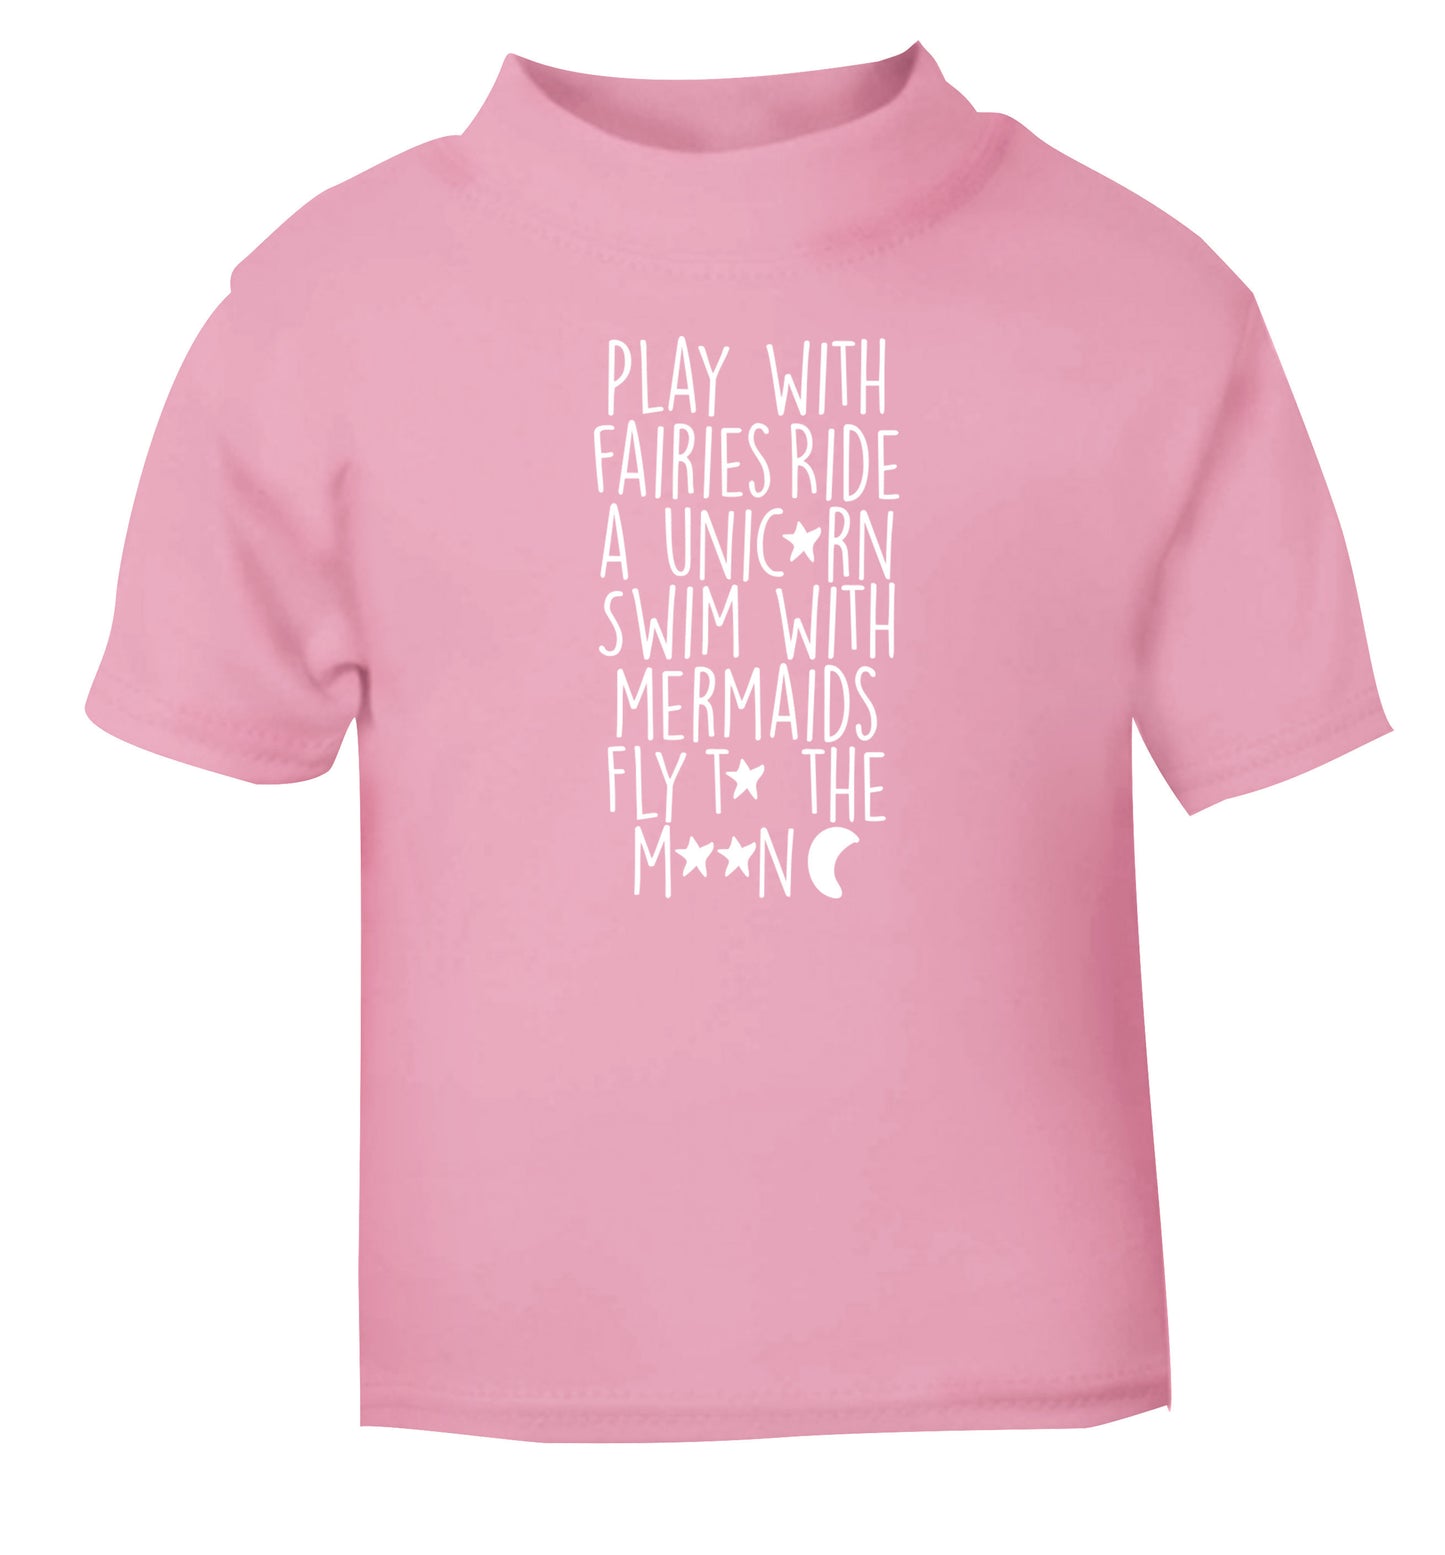 Play with fairies ride a unicorn swim with mermaids fly to the moon light pink Baby Toddler Tshirt 2 Years